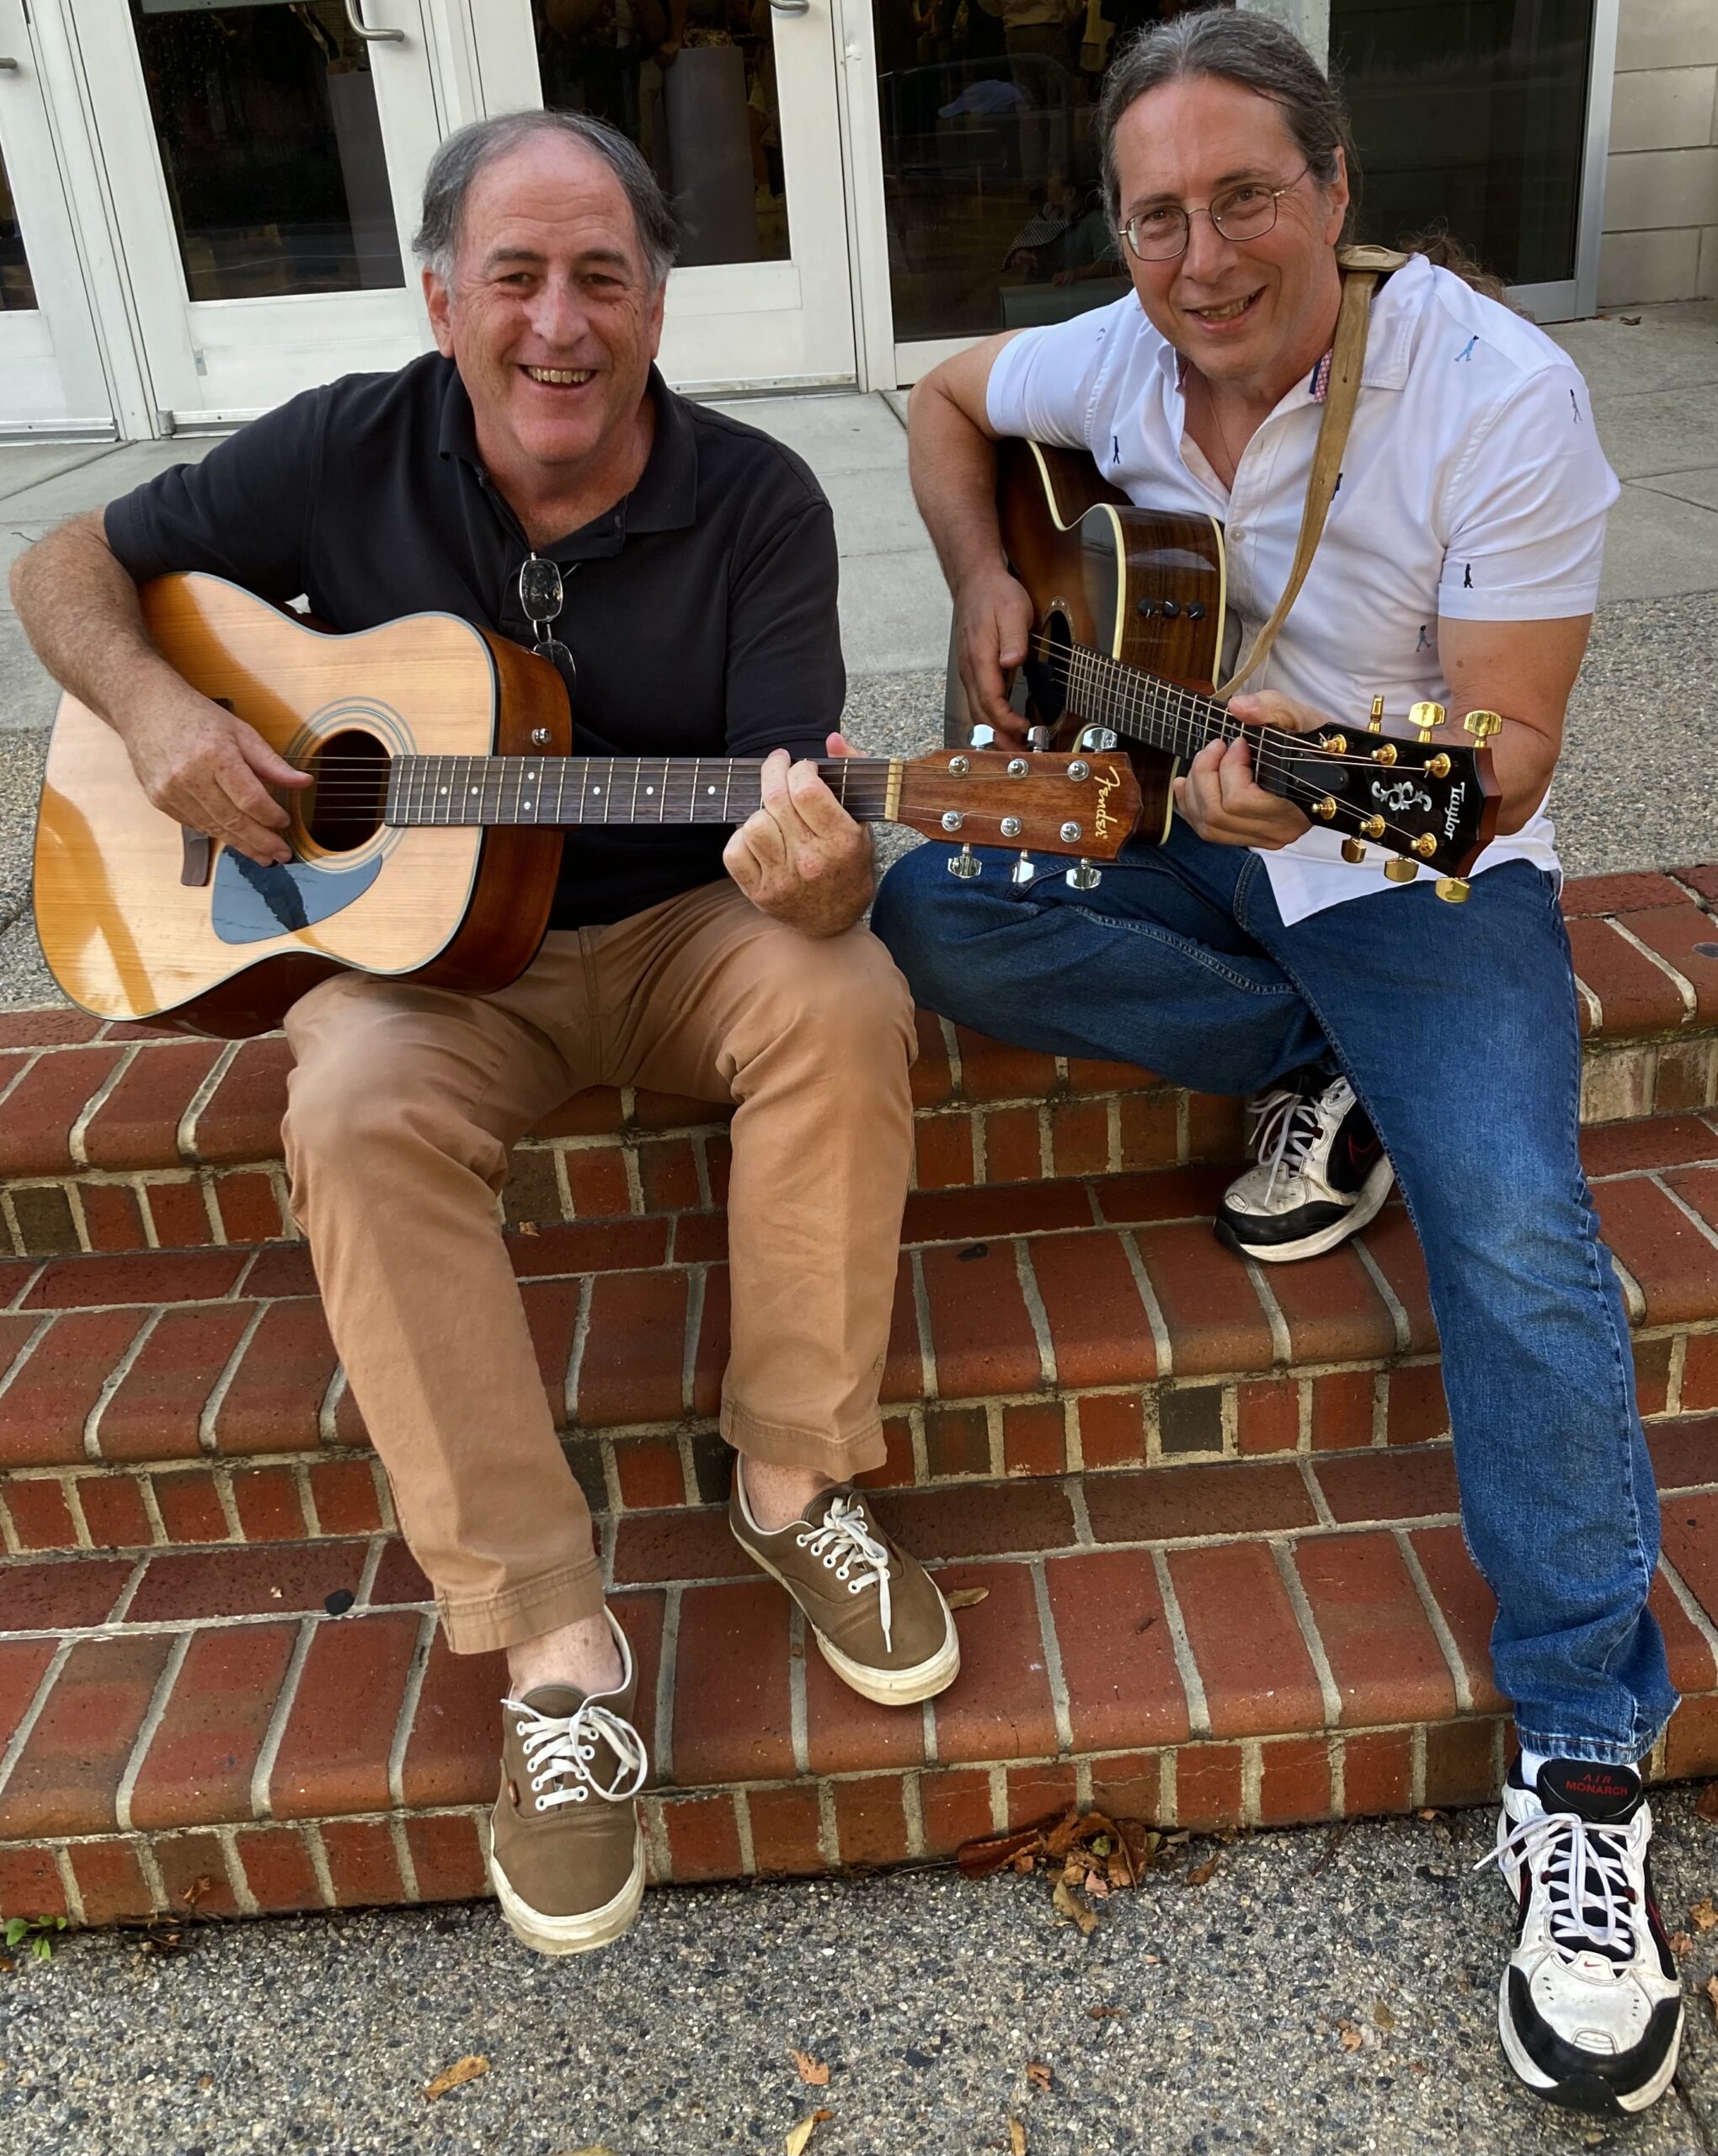 Editors Bob Kunzinger and Drew Lopenzina sitting on brick steps, laughing together. Bob is balding, Drew has a ponytail and glasses. Both wear sneakers and hold guitars.